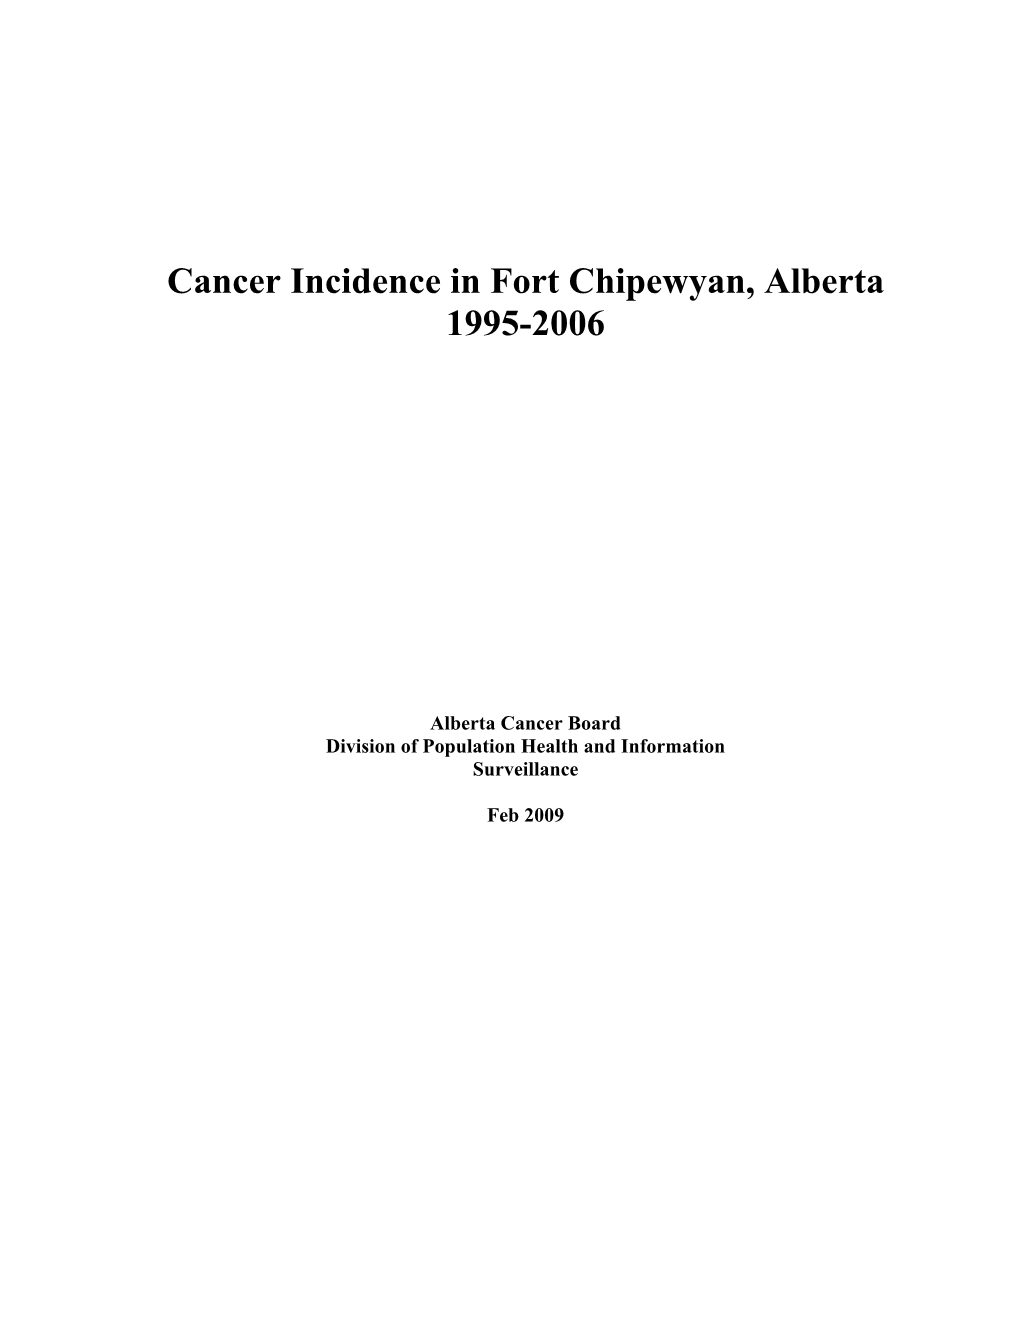 Cancer Incidence in Fort Chipewyan, Alberta 1995-2006